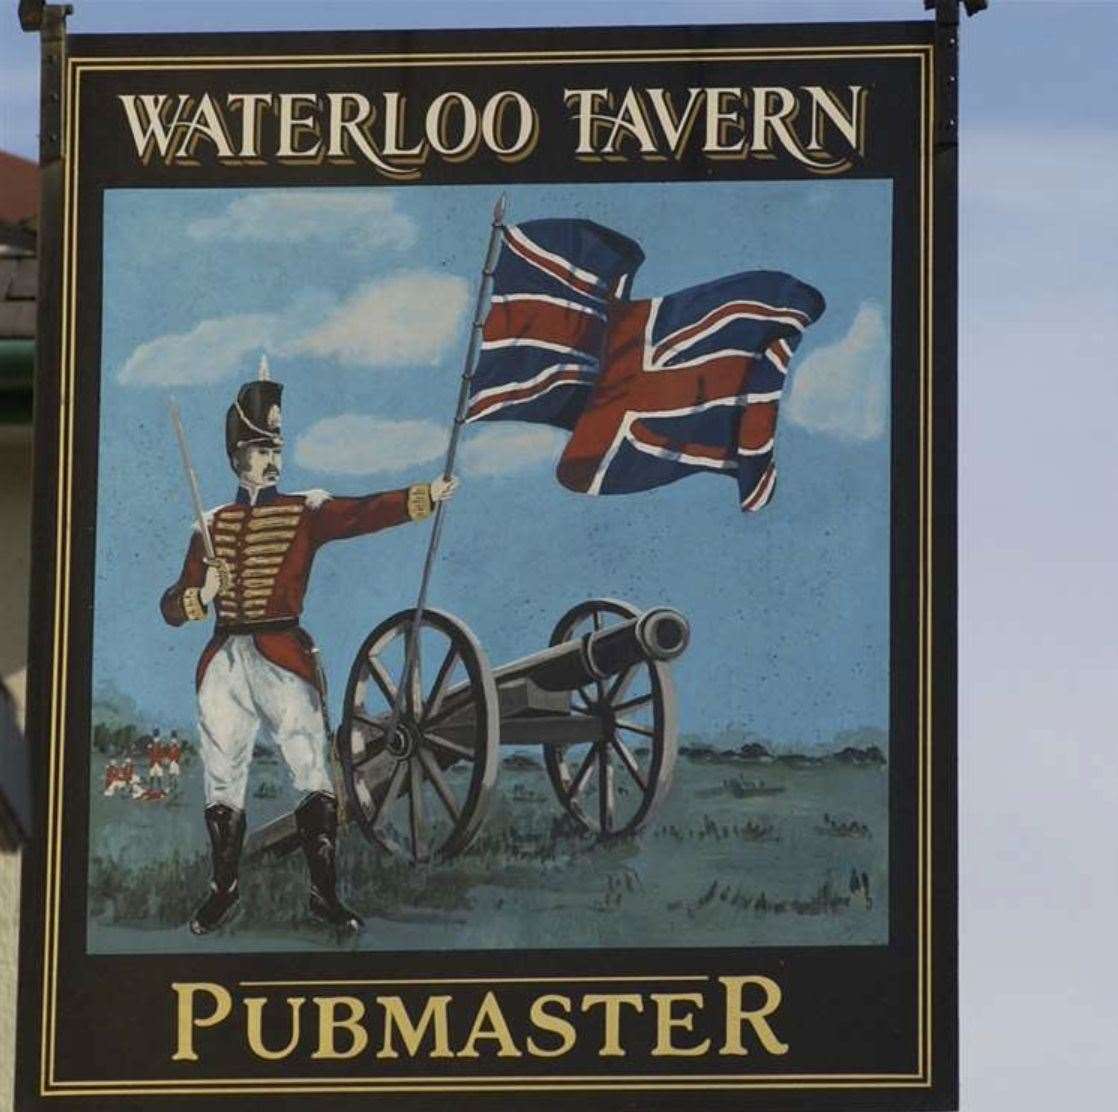 Formerly known as Waterloo Tavern, the boozer closed after gaining a negative reputation